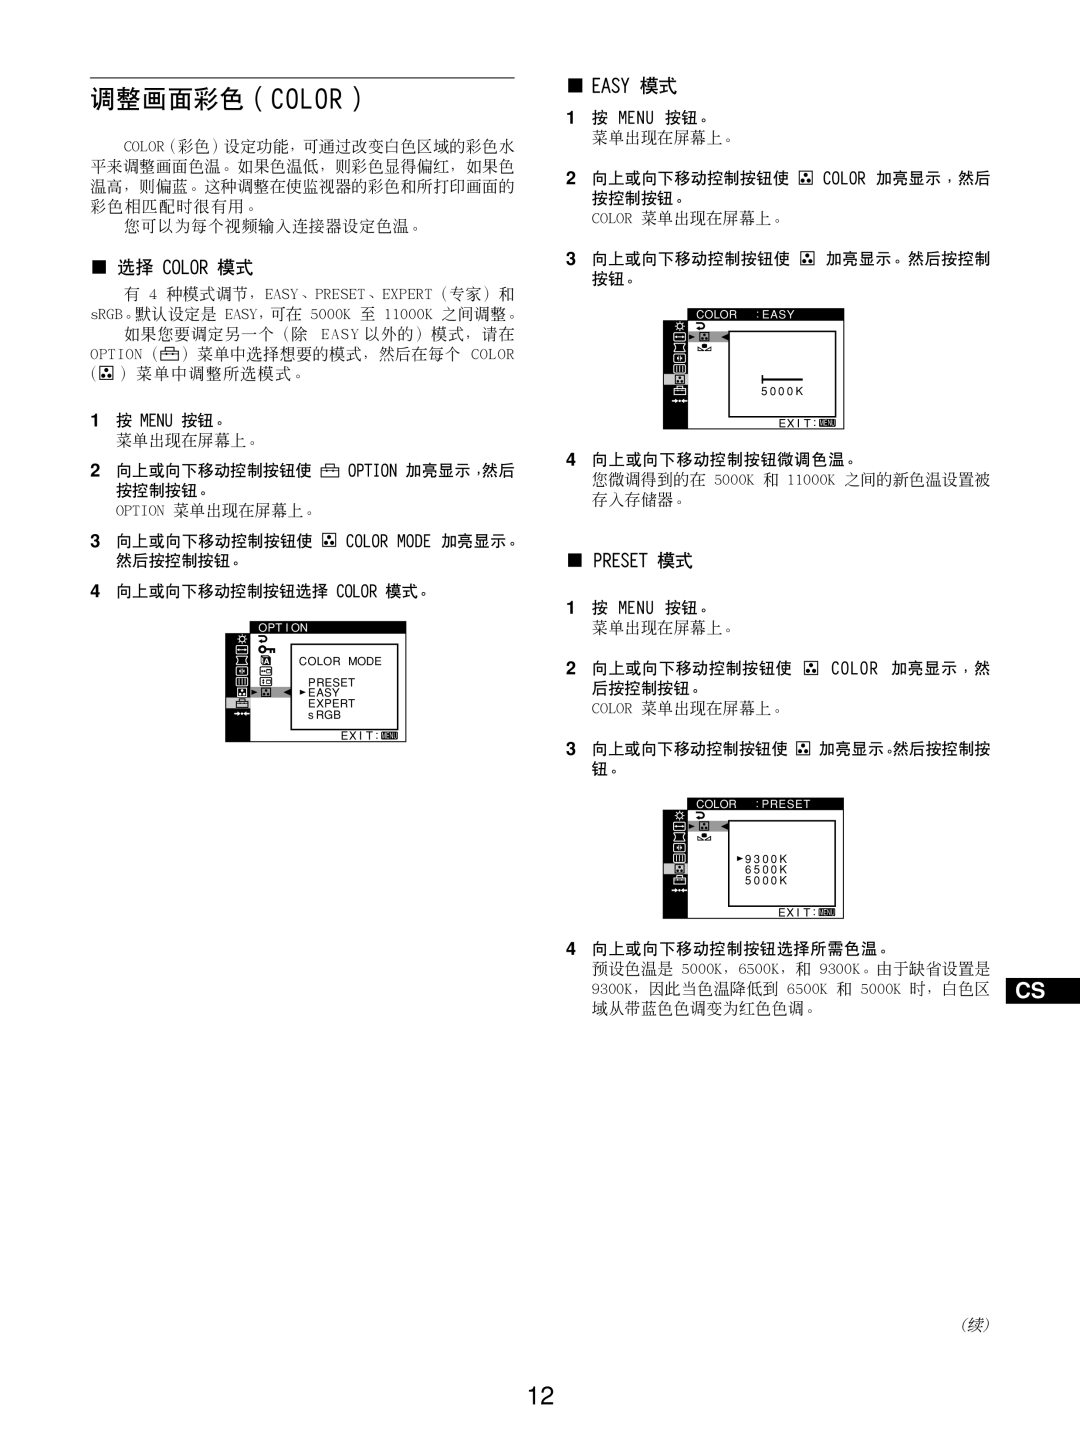 Sony GDM-5510 operating instructions 调整画面彩色（Color）, Easy 模式 